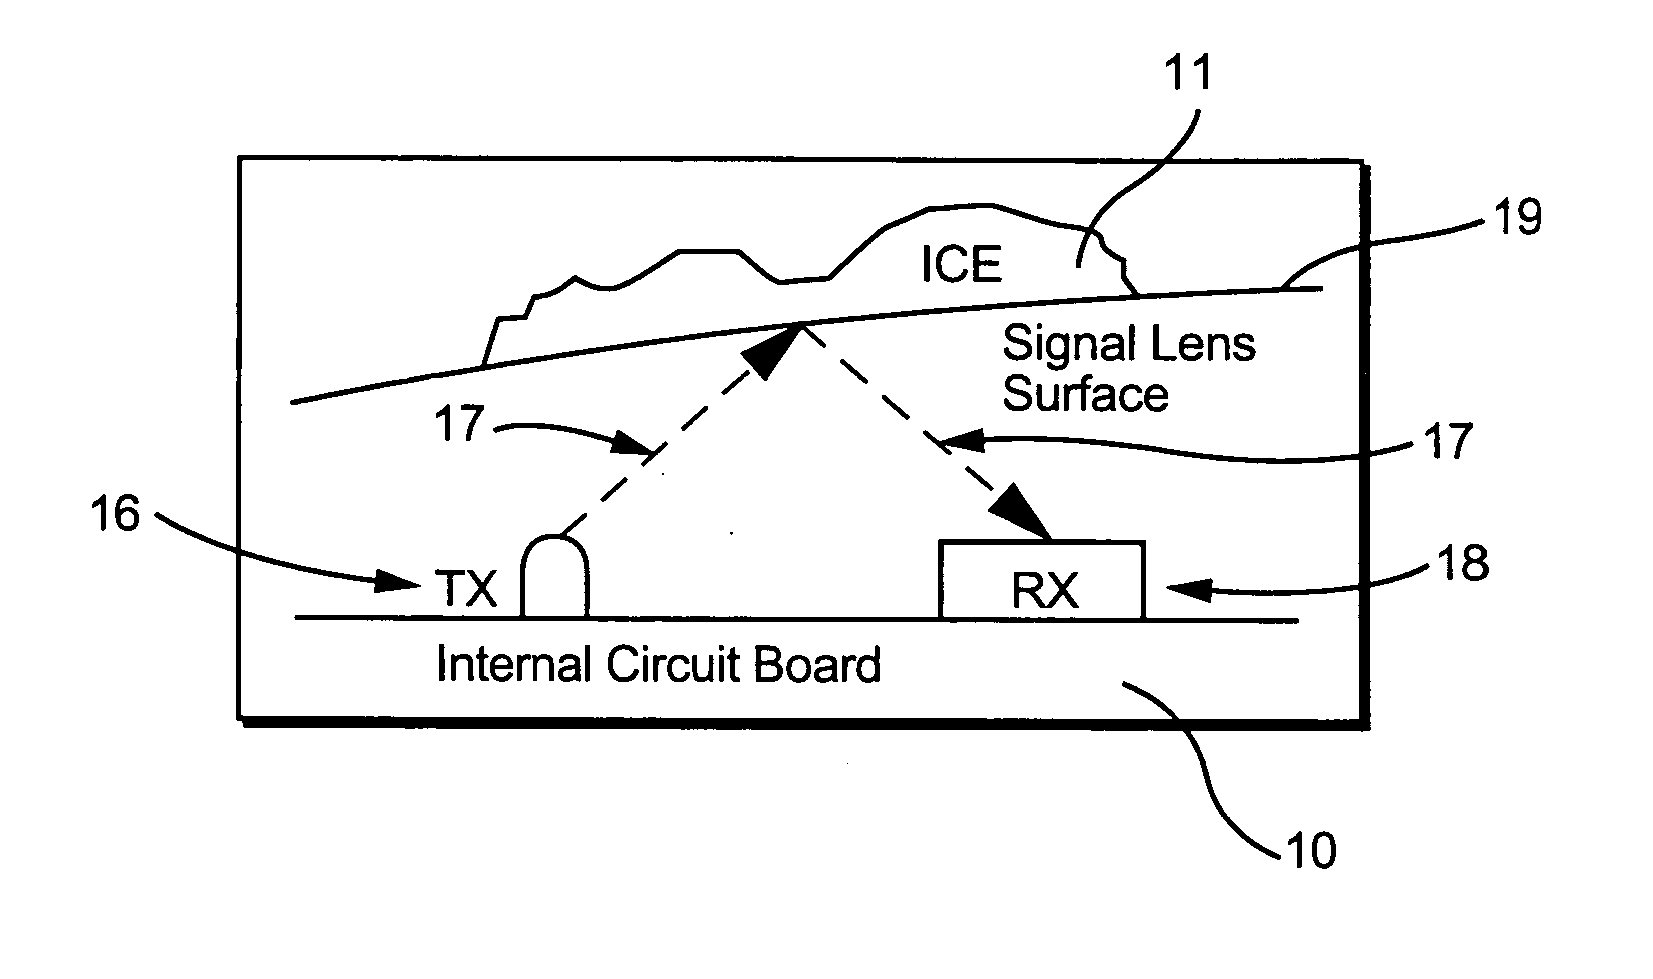 De-icing system for traffic signals